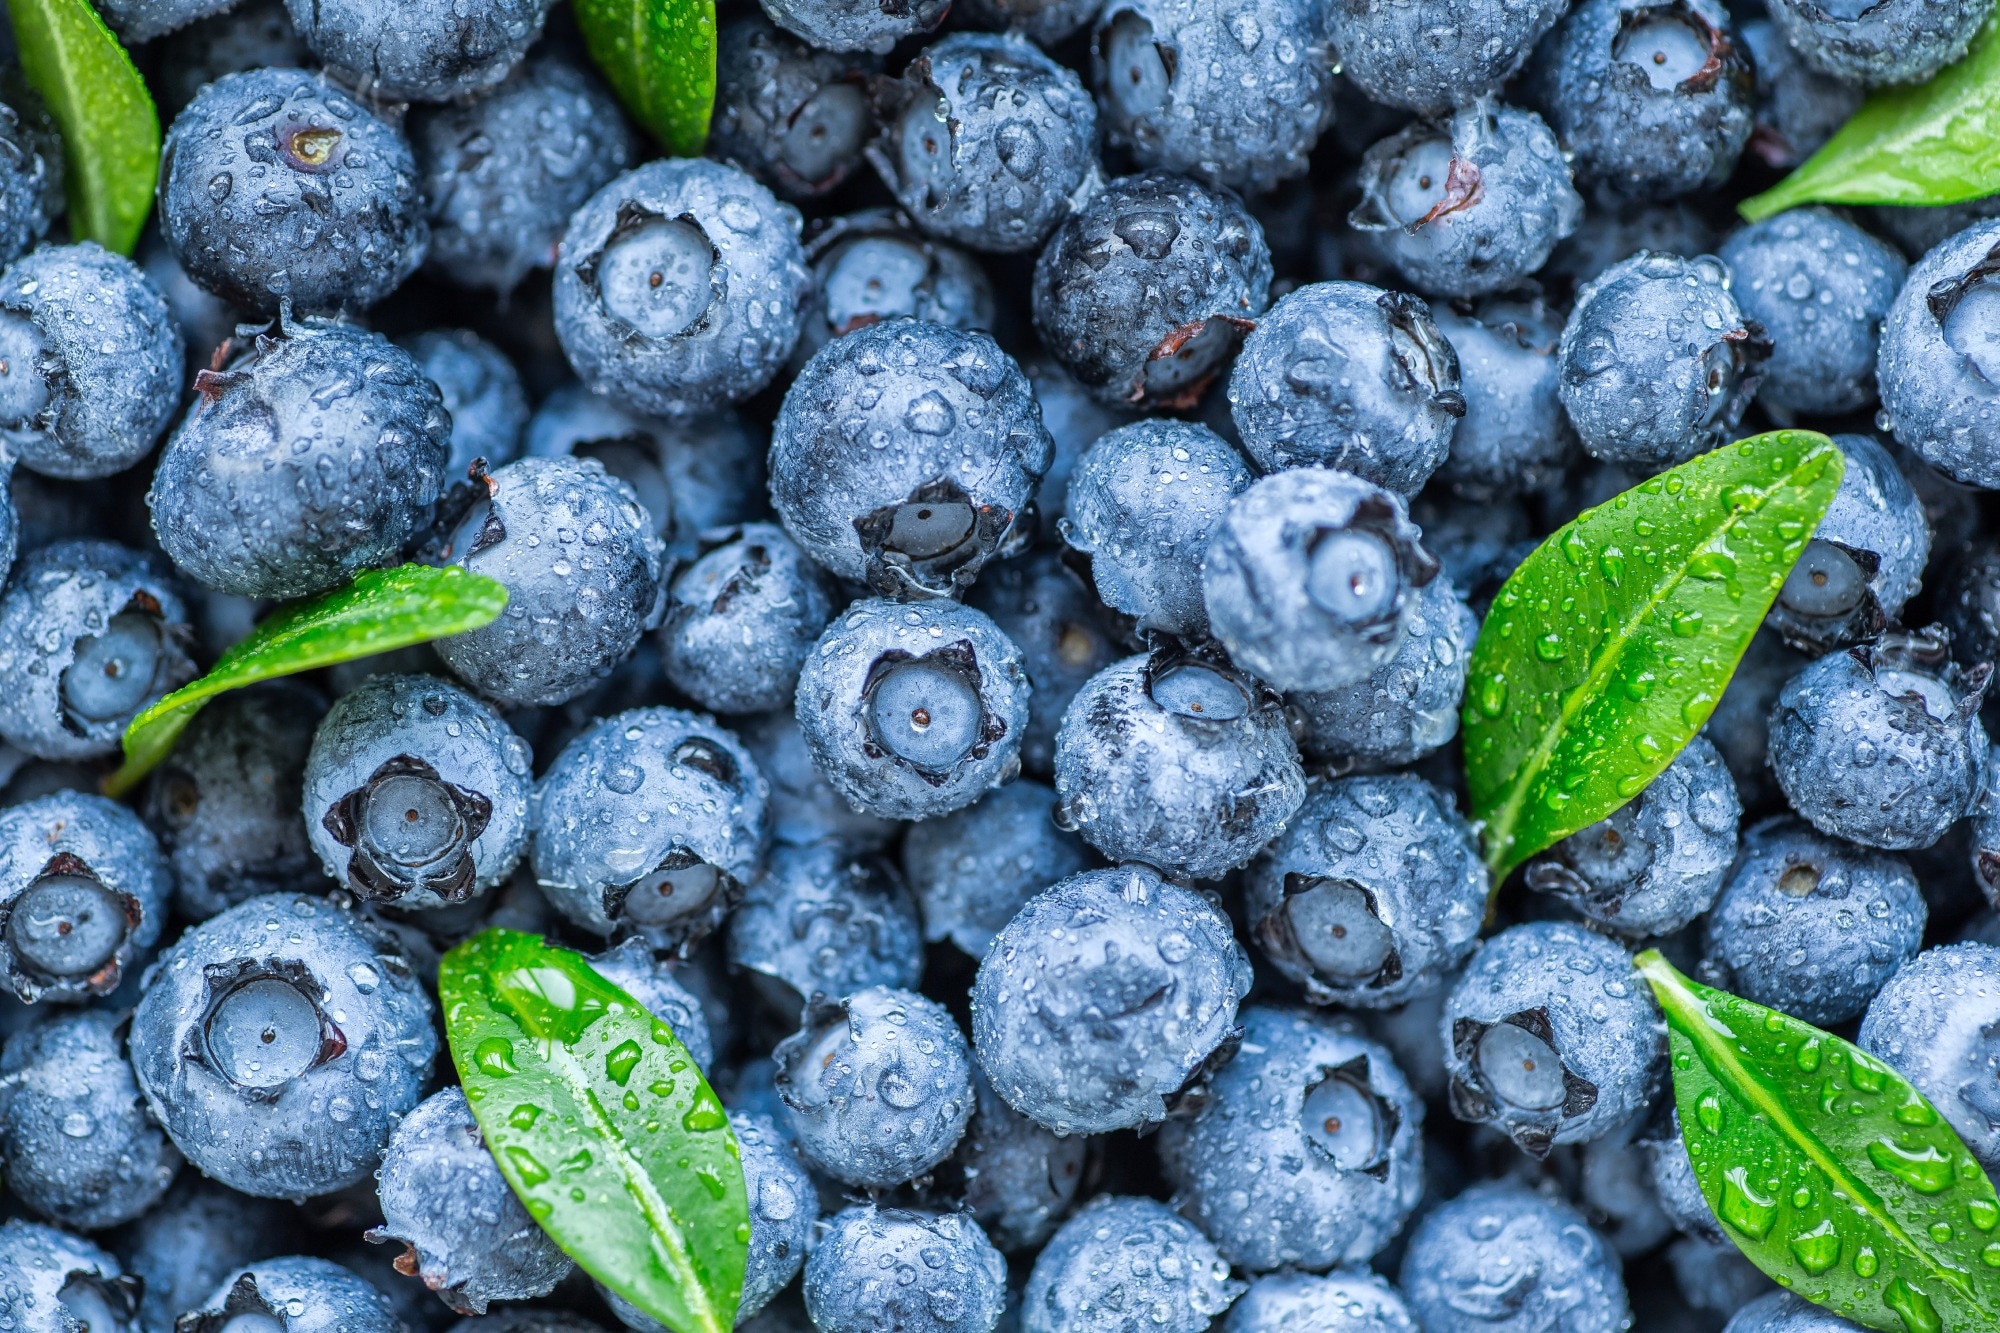 Study: Inter-Individual Responses to a Blueberry Intervention across Multiple Endpoints. Image Credit: Bukhta Yurii/Shutterstock.com